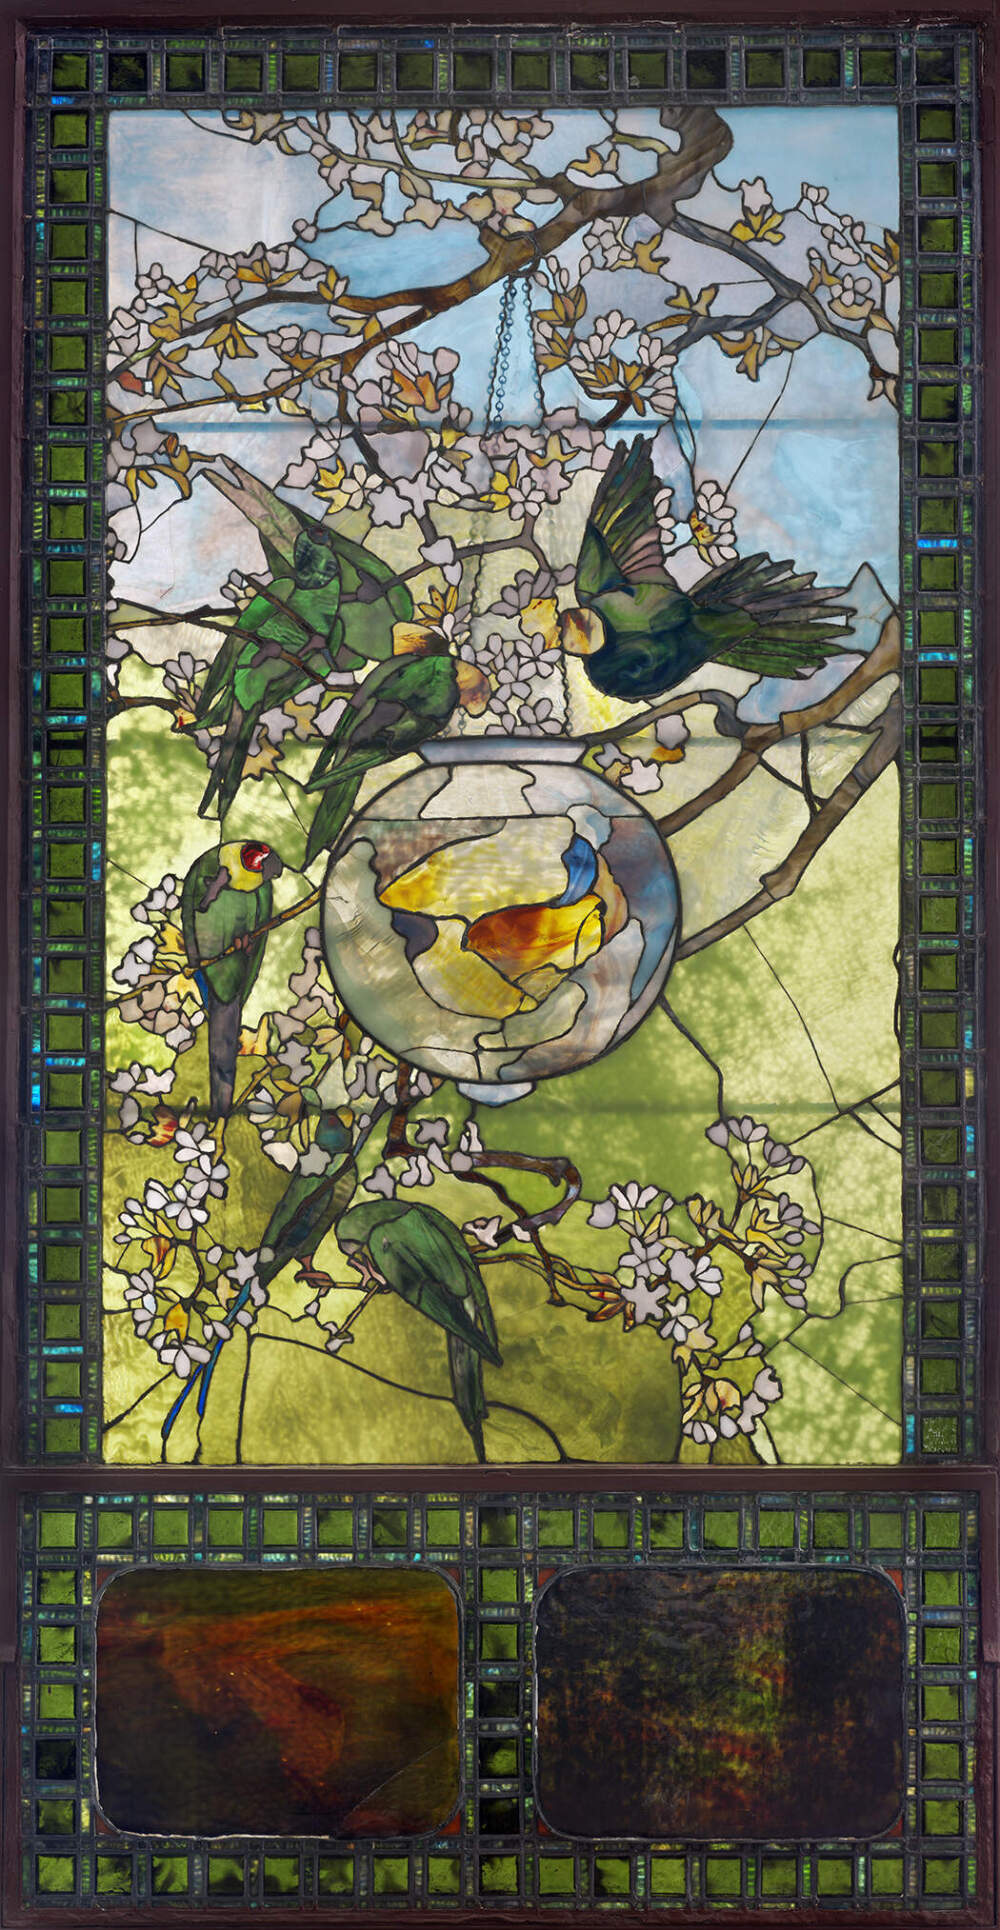 &quot;Parakeets&quot; (1889), designed by Louis Comfort Tiffany. Made by Tiffany Glass and Decorating Company. (Courtesy Museum of Fine Arts, Boston)